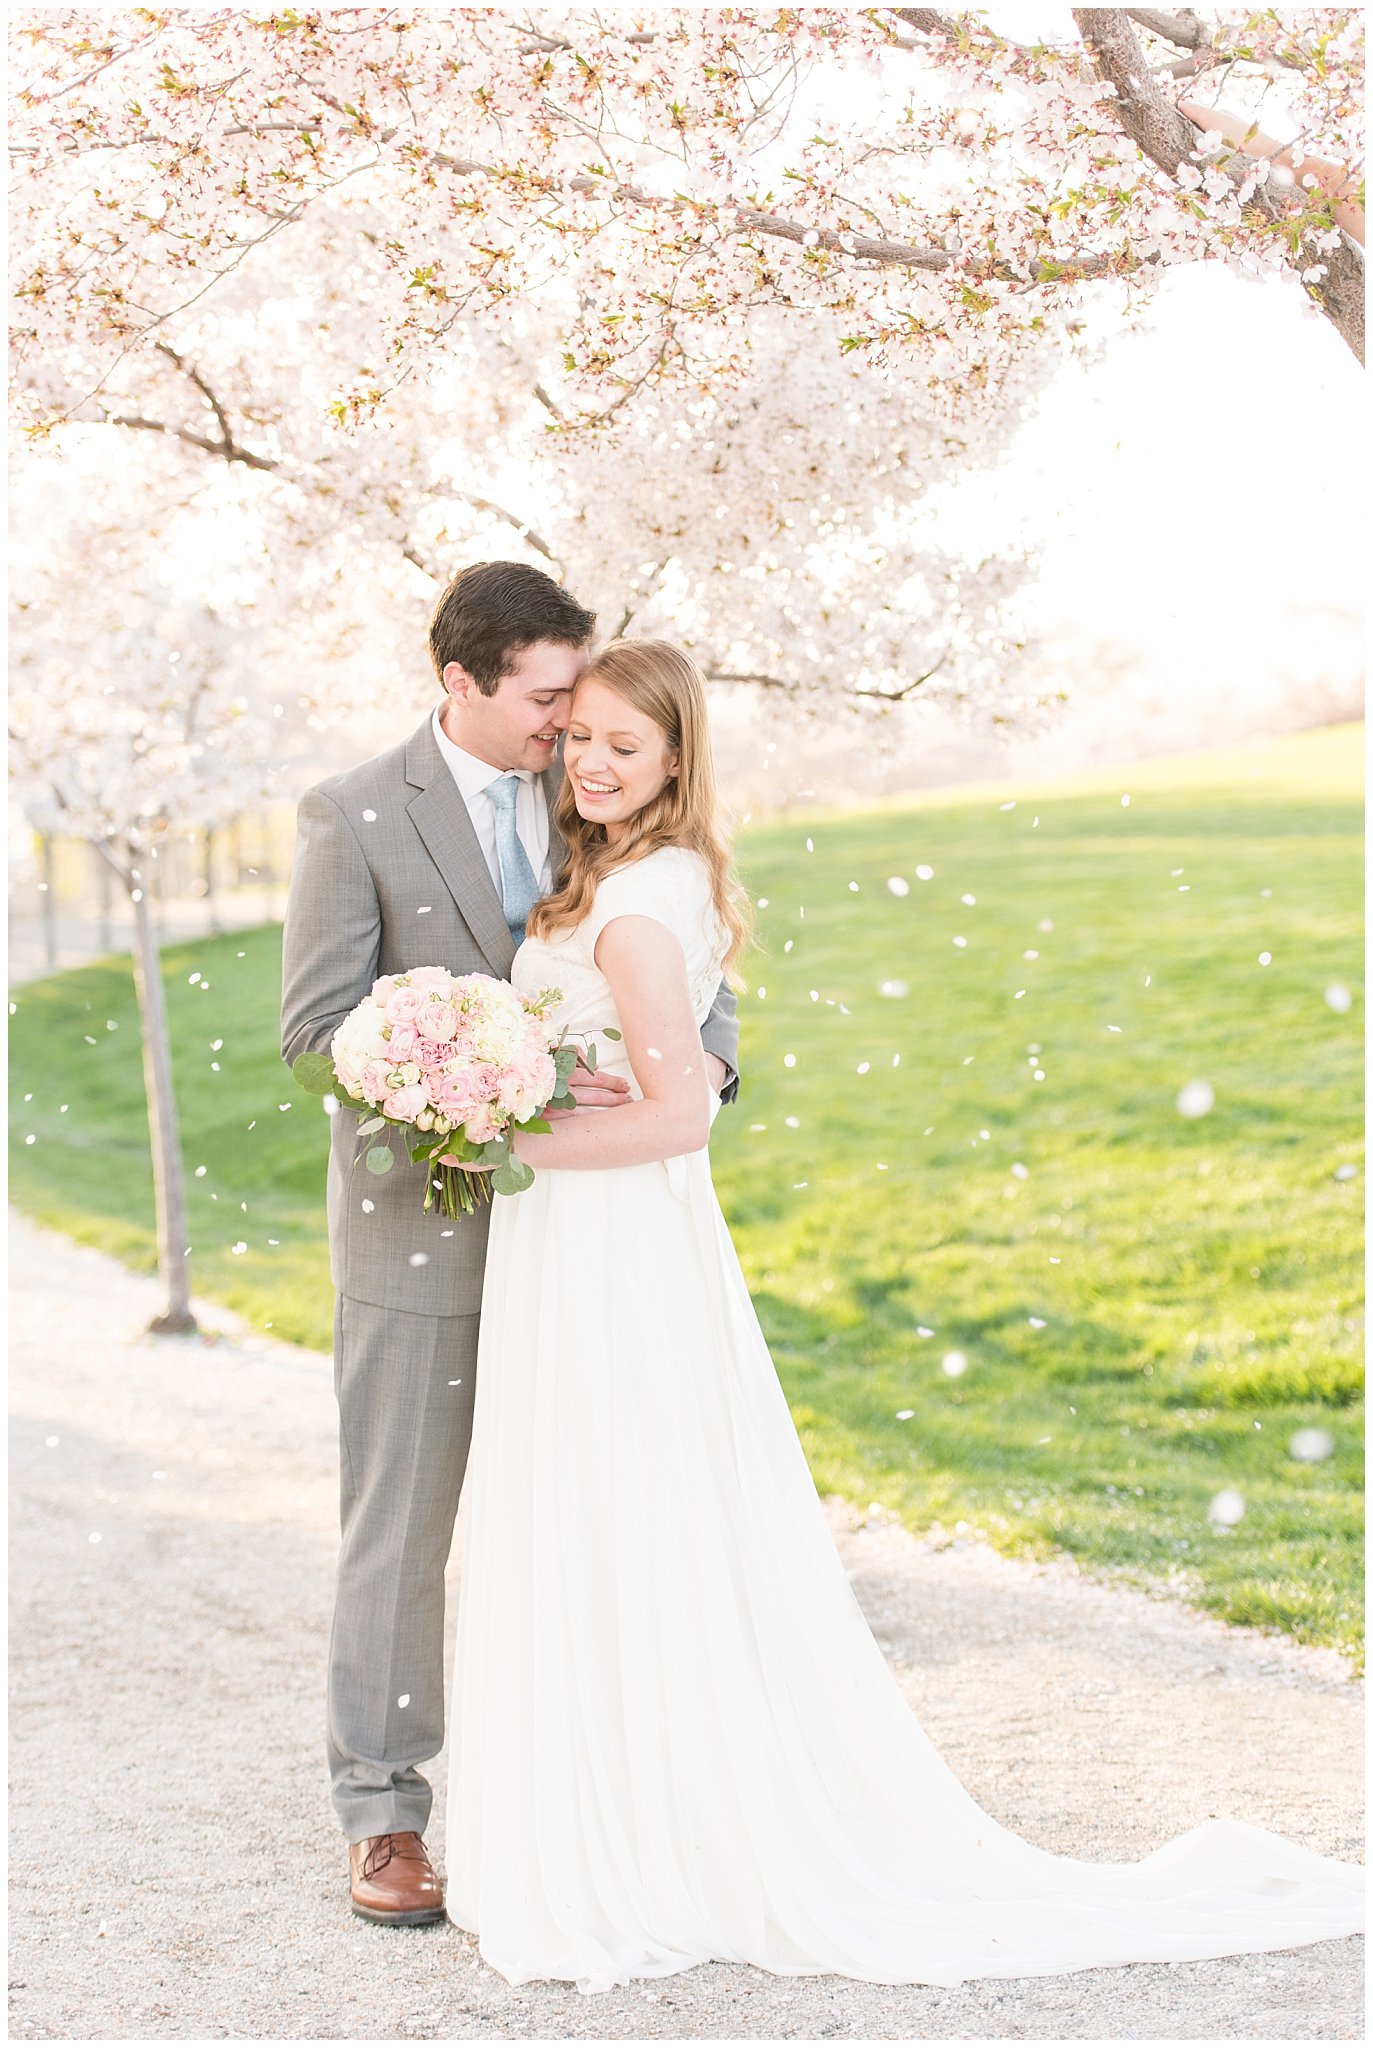 Bride with blush bouquet and groom with grey suit in the cherry blossoms with falling petals | Utah State Capitol Blossoms Formal Session | Salt Lake Wedding Photographers | Jessie and Dallin Photography